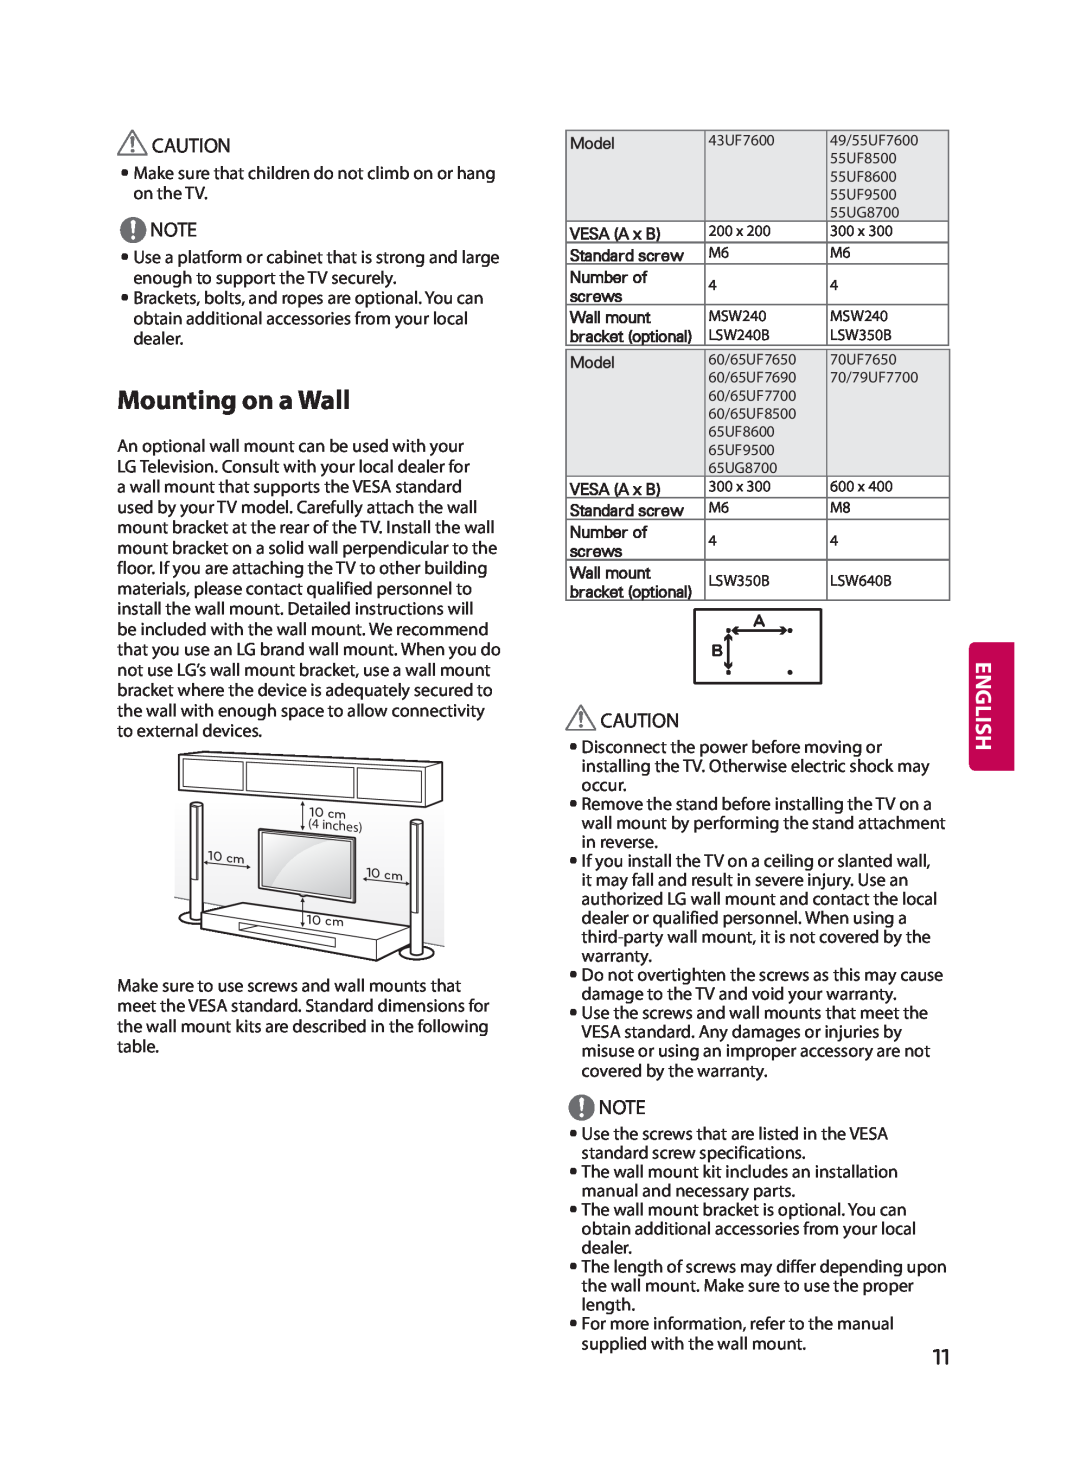 LG Electronics 60UF7700, 49UF7600, 55UF7600 owner manual Mounting on a Wall, English 